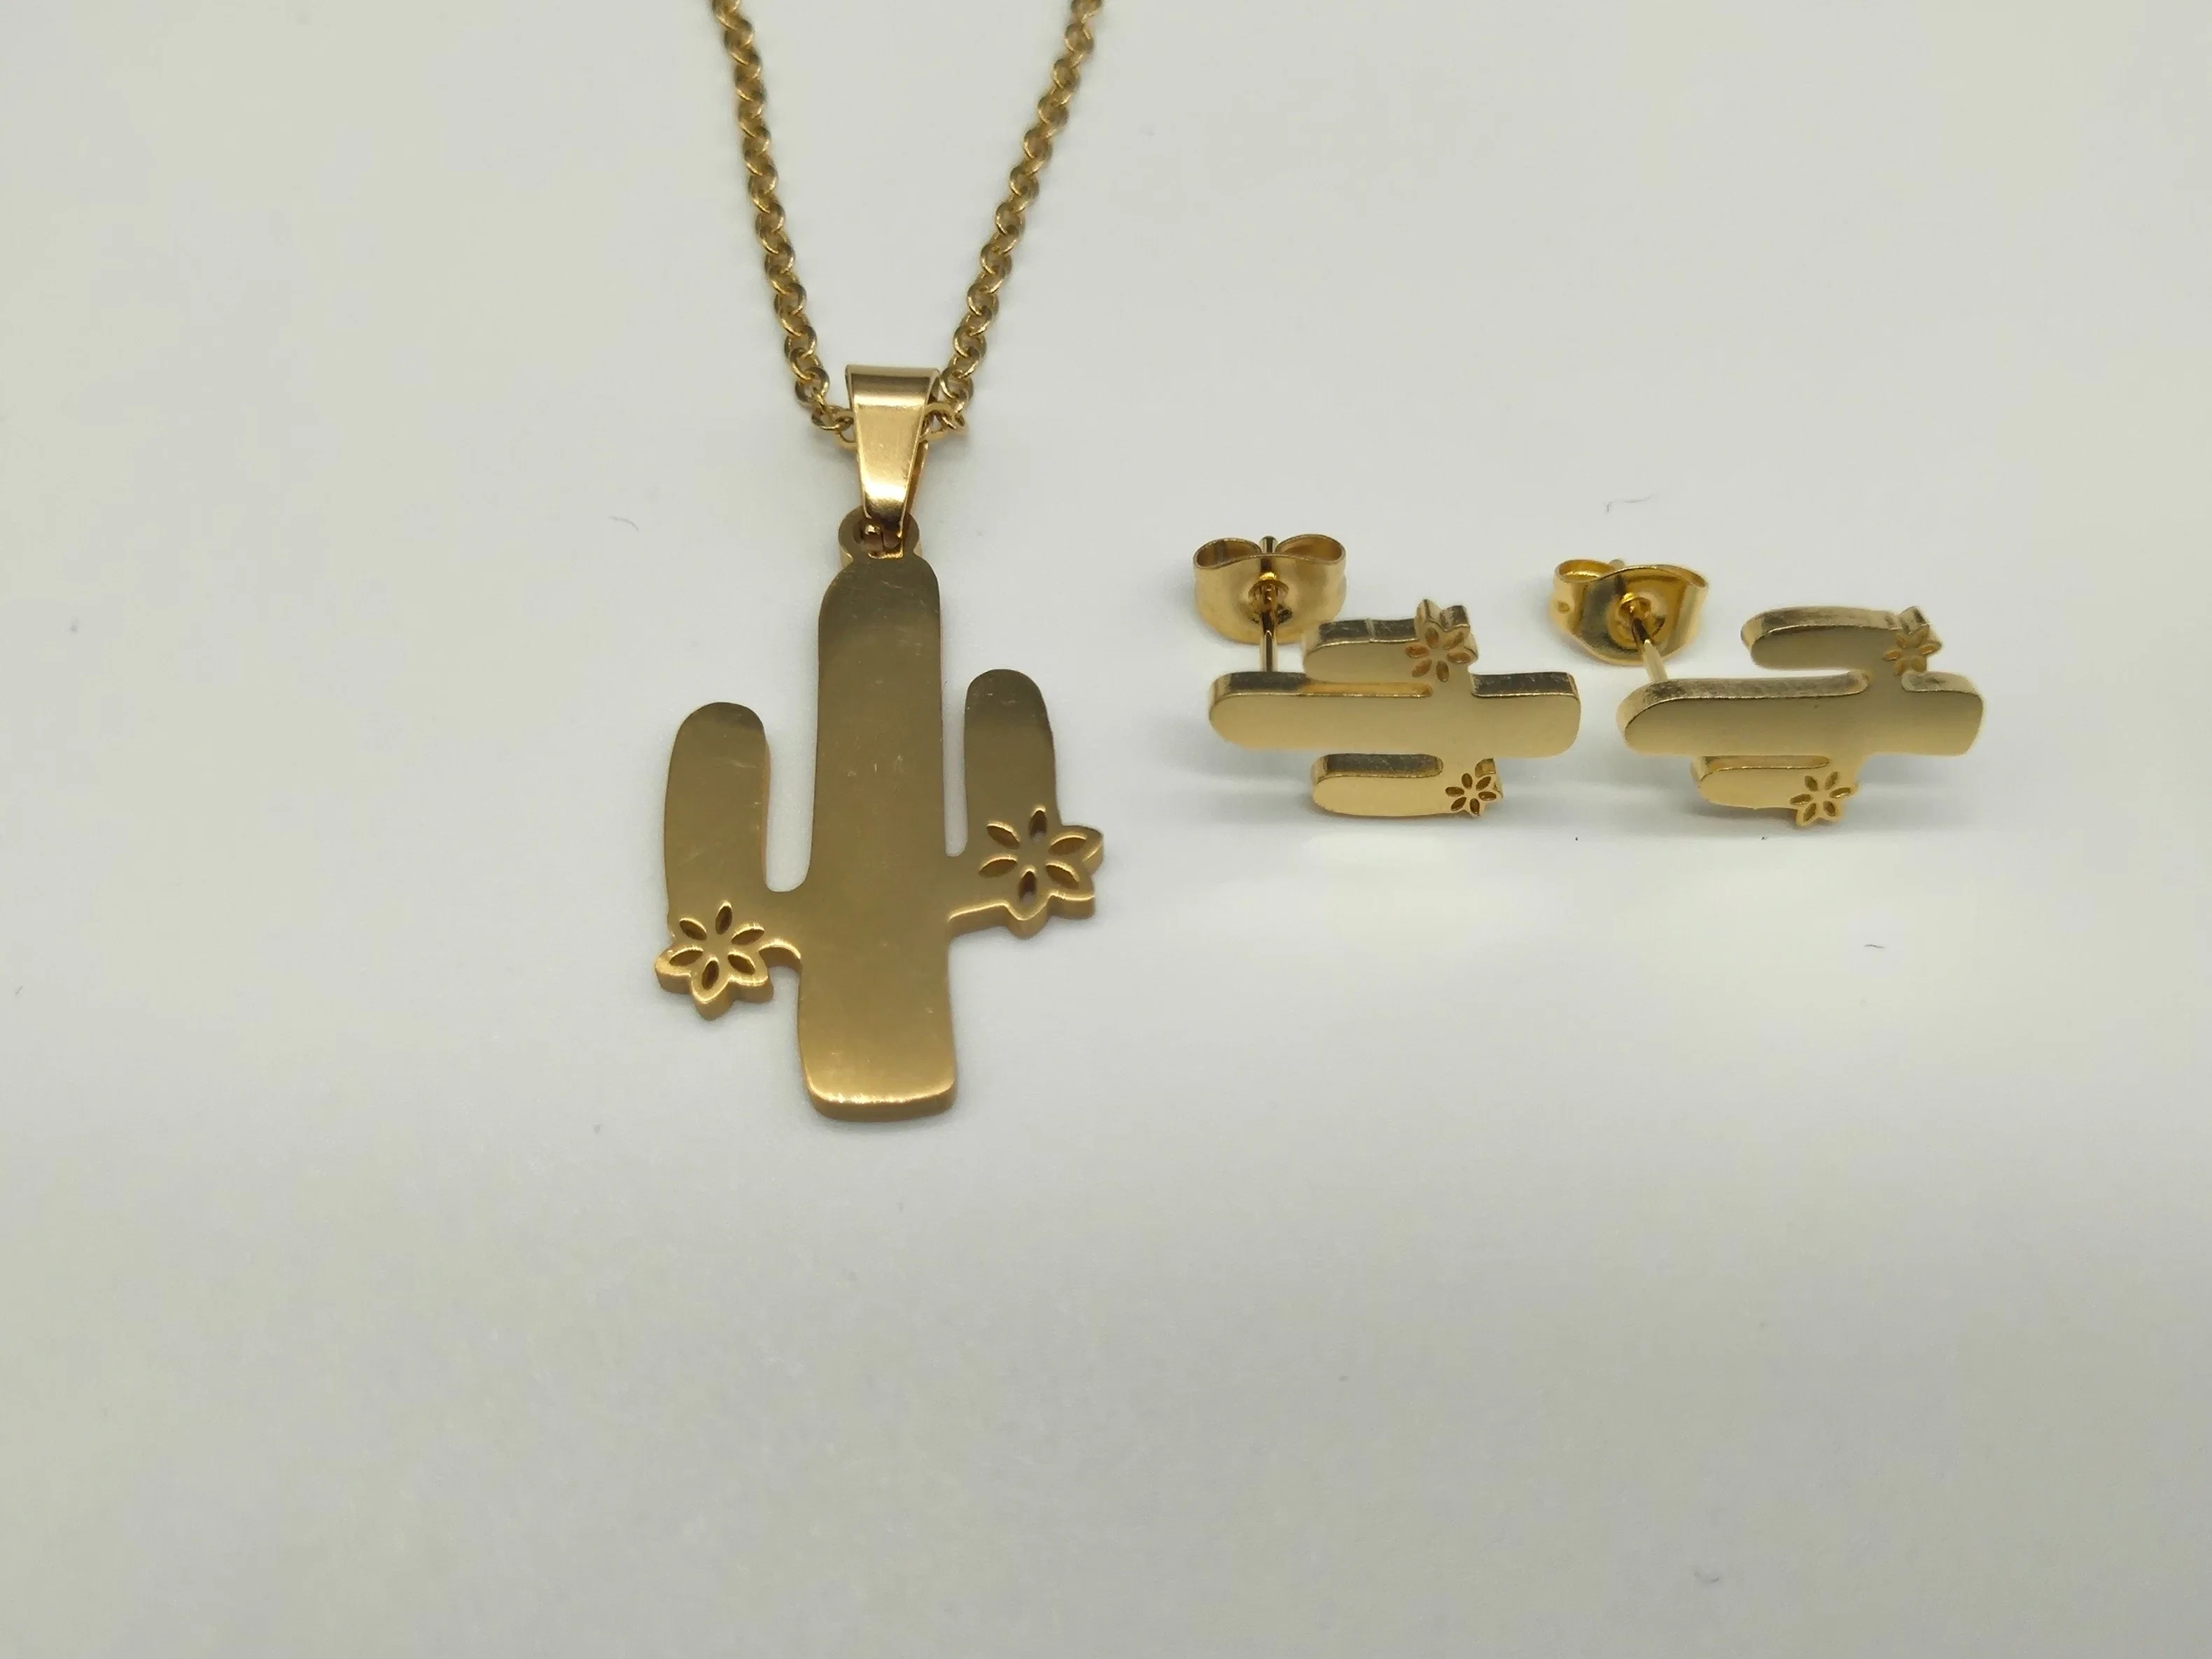 Hot Selling Fashion Stainless Steel Jewelry Accessories Personalize Gold Plated Cactus Shape Pendant Necklace and Earrings for Girls